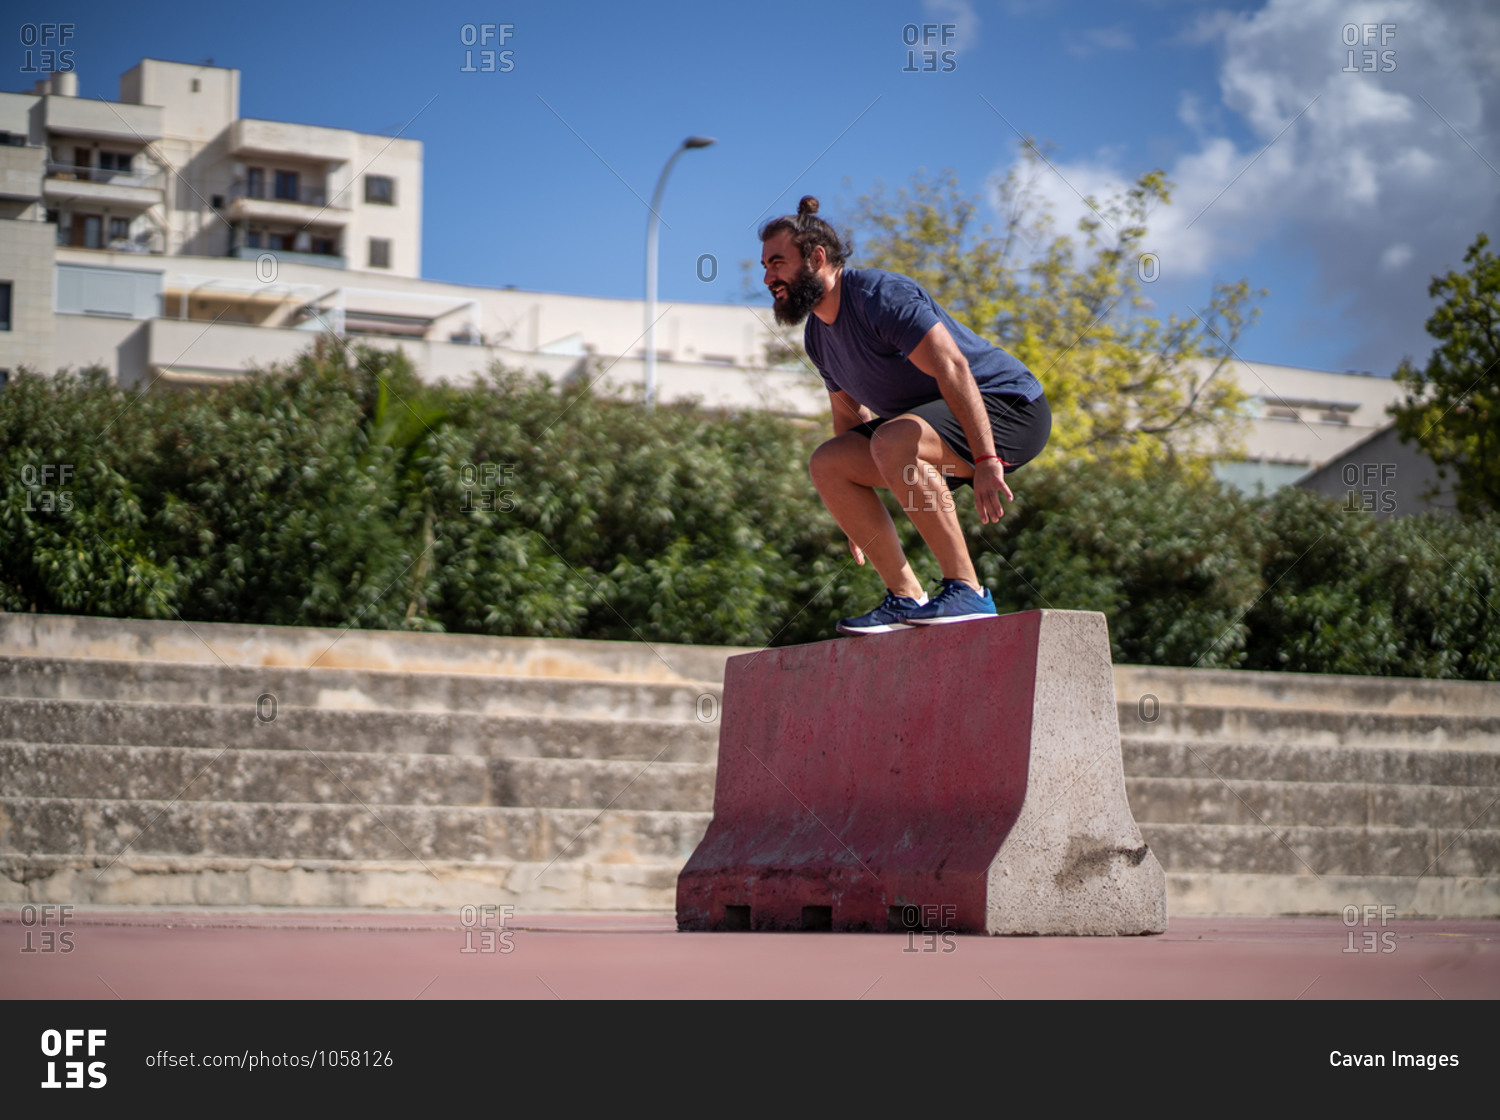 Man trains with squat jumps on a platform in the middle of a court